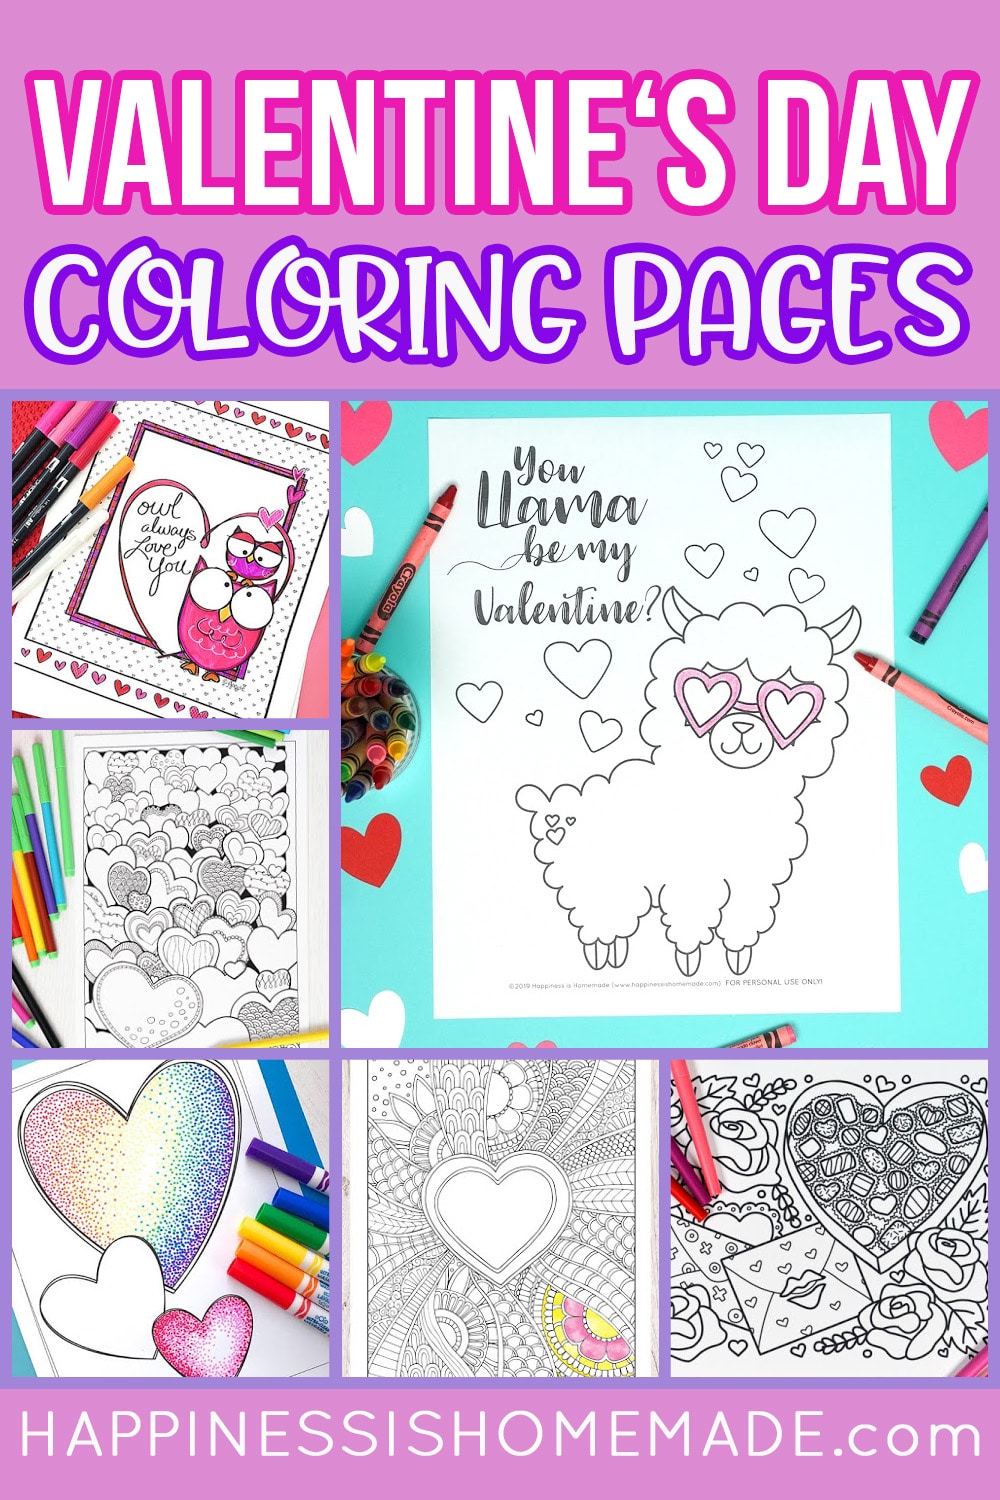 Valentine's Day Coloring Pages- FREE Printable! - Little Learning Club